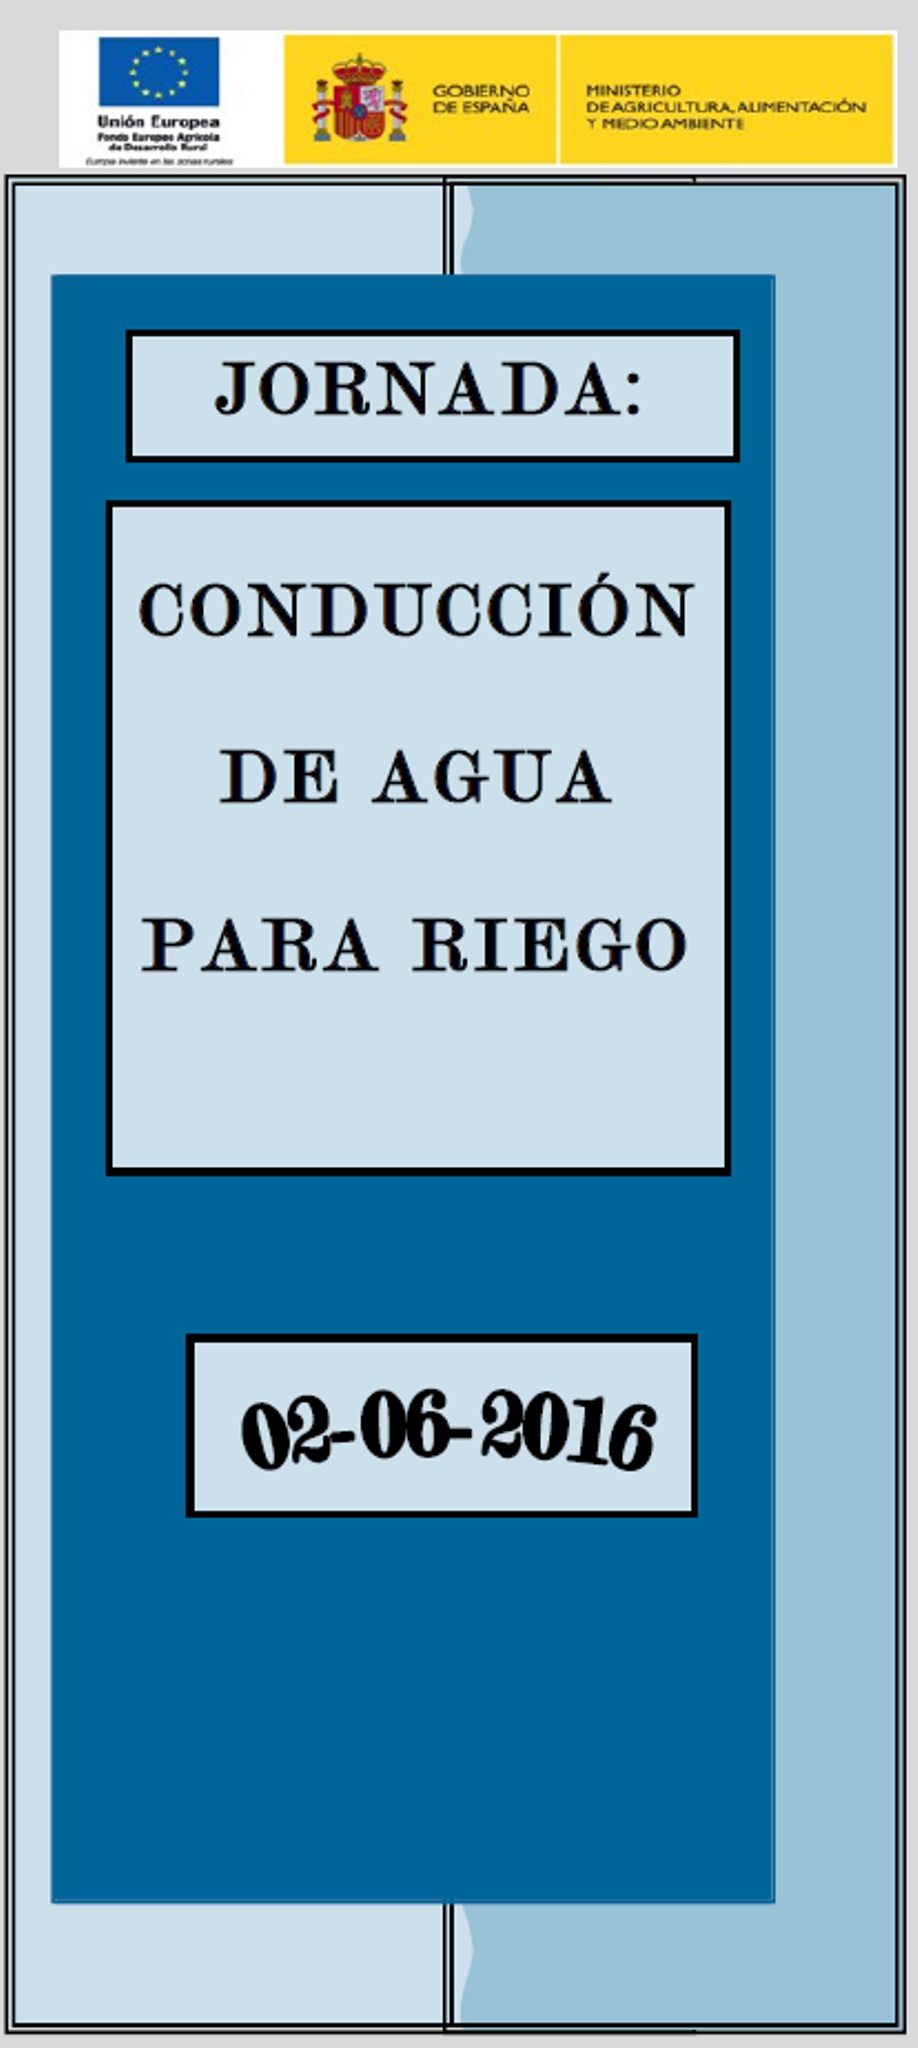 Prefabricados Delta is rapporteur in the CENTER Technical Conference “Pipes in Irrigation”.